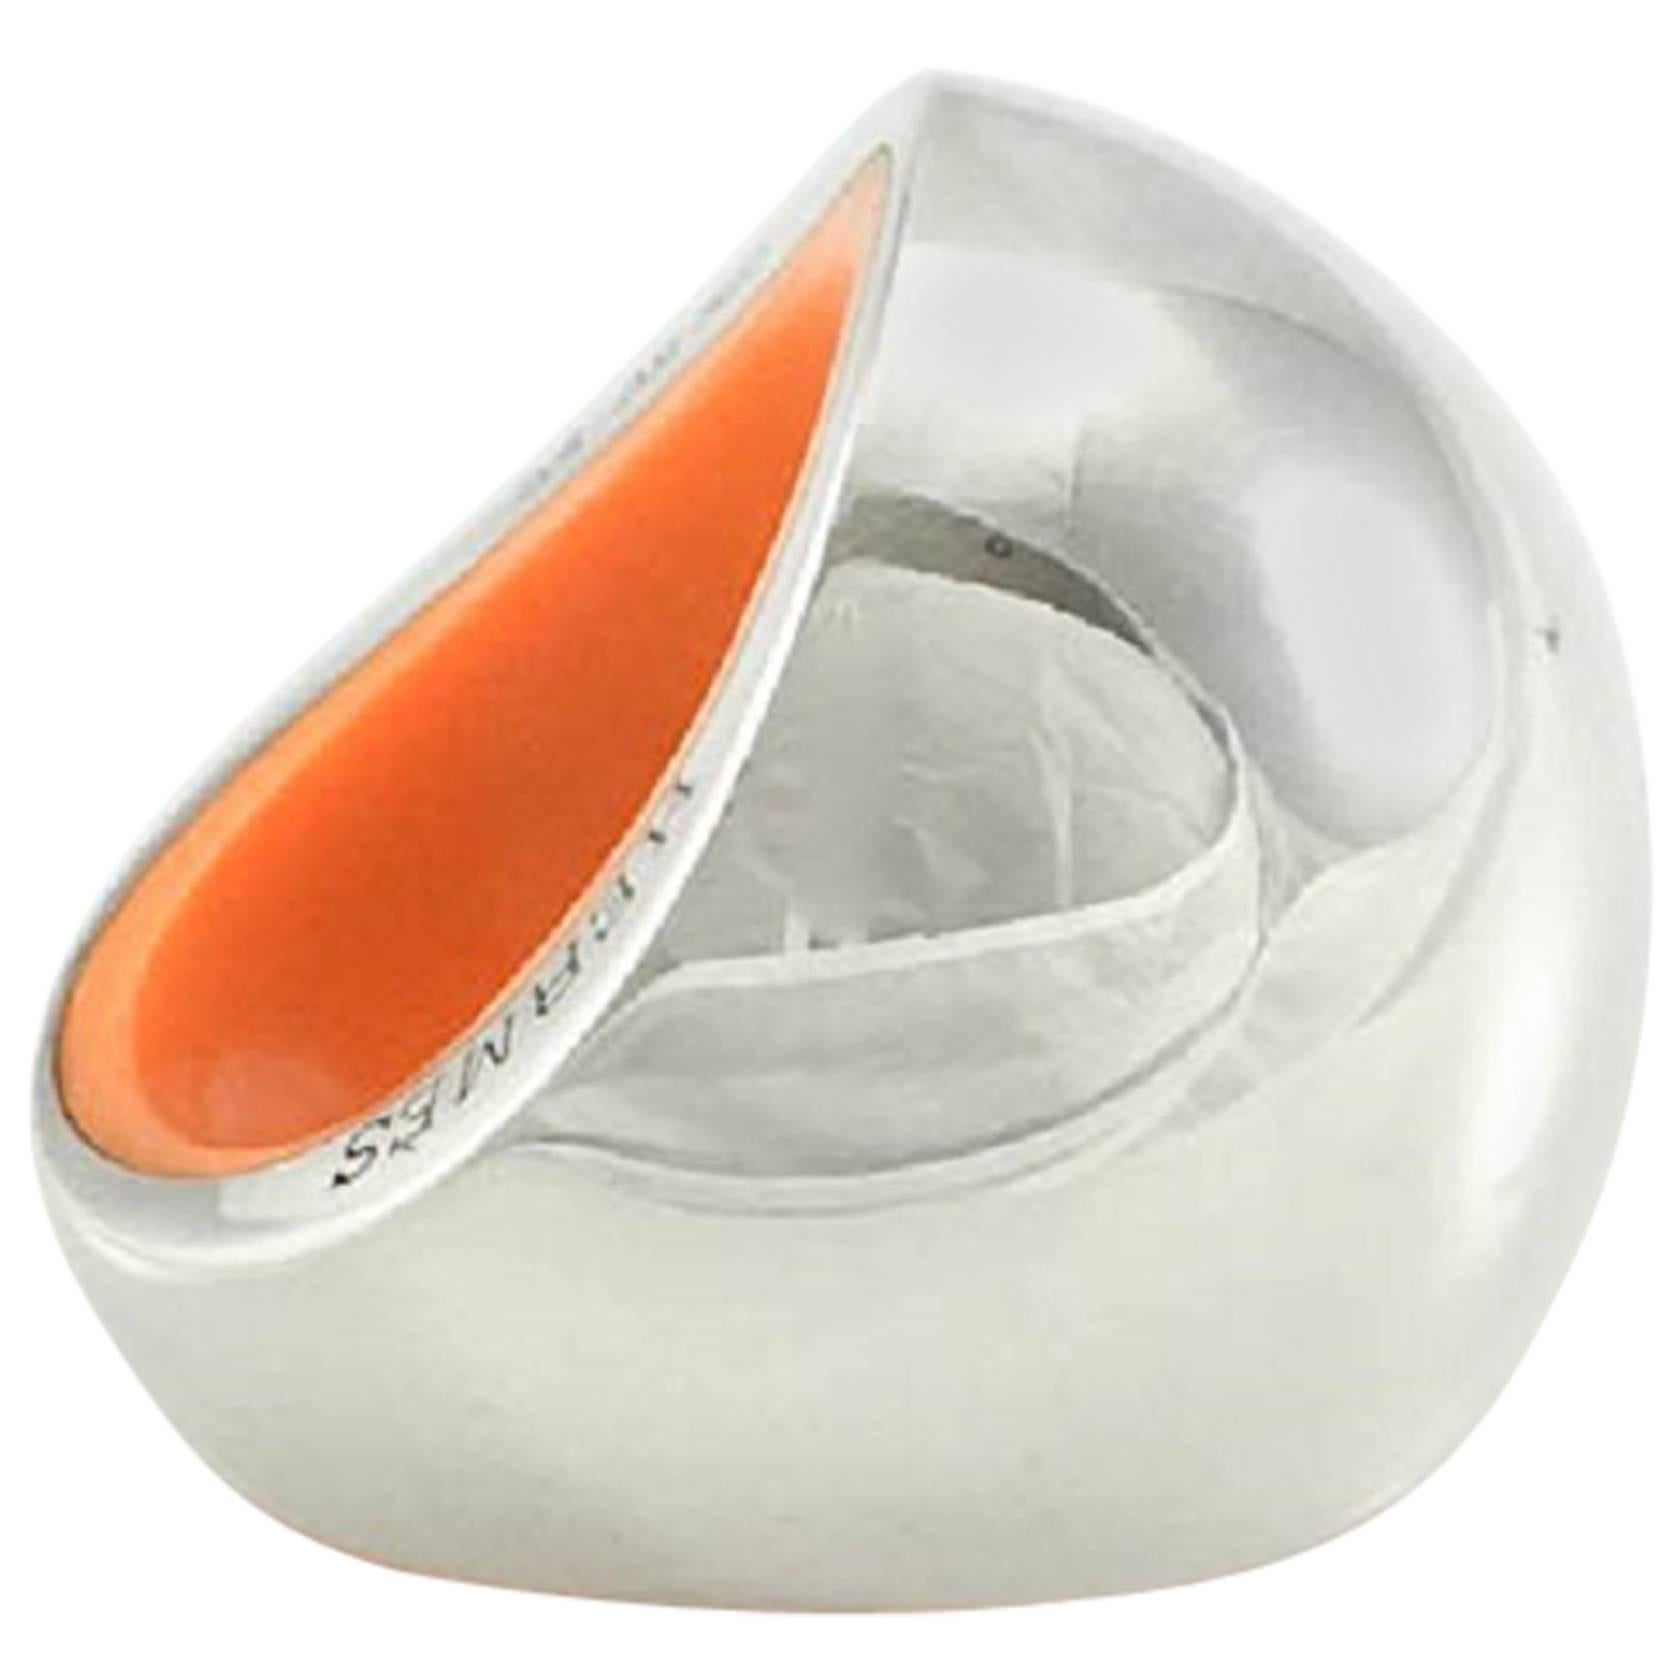 Hermes Silver Quark Ring. This gorgeous silver ring by Hermes is part of the Quark line. In solid silver, it has a great, smooth and round chunky design. The inside of the ring is made in hard plastic in Hermes iconic orange. It has just been